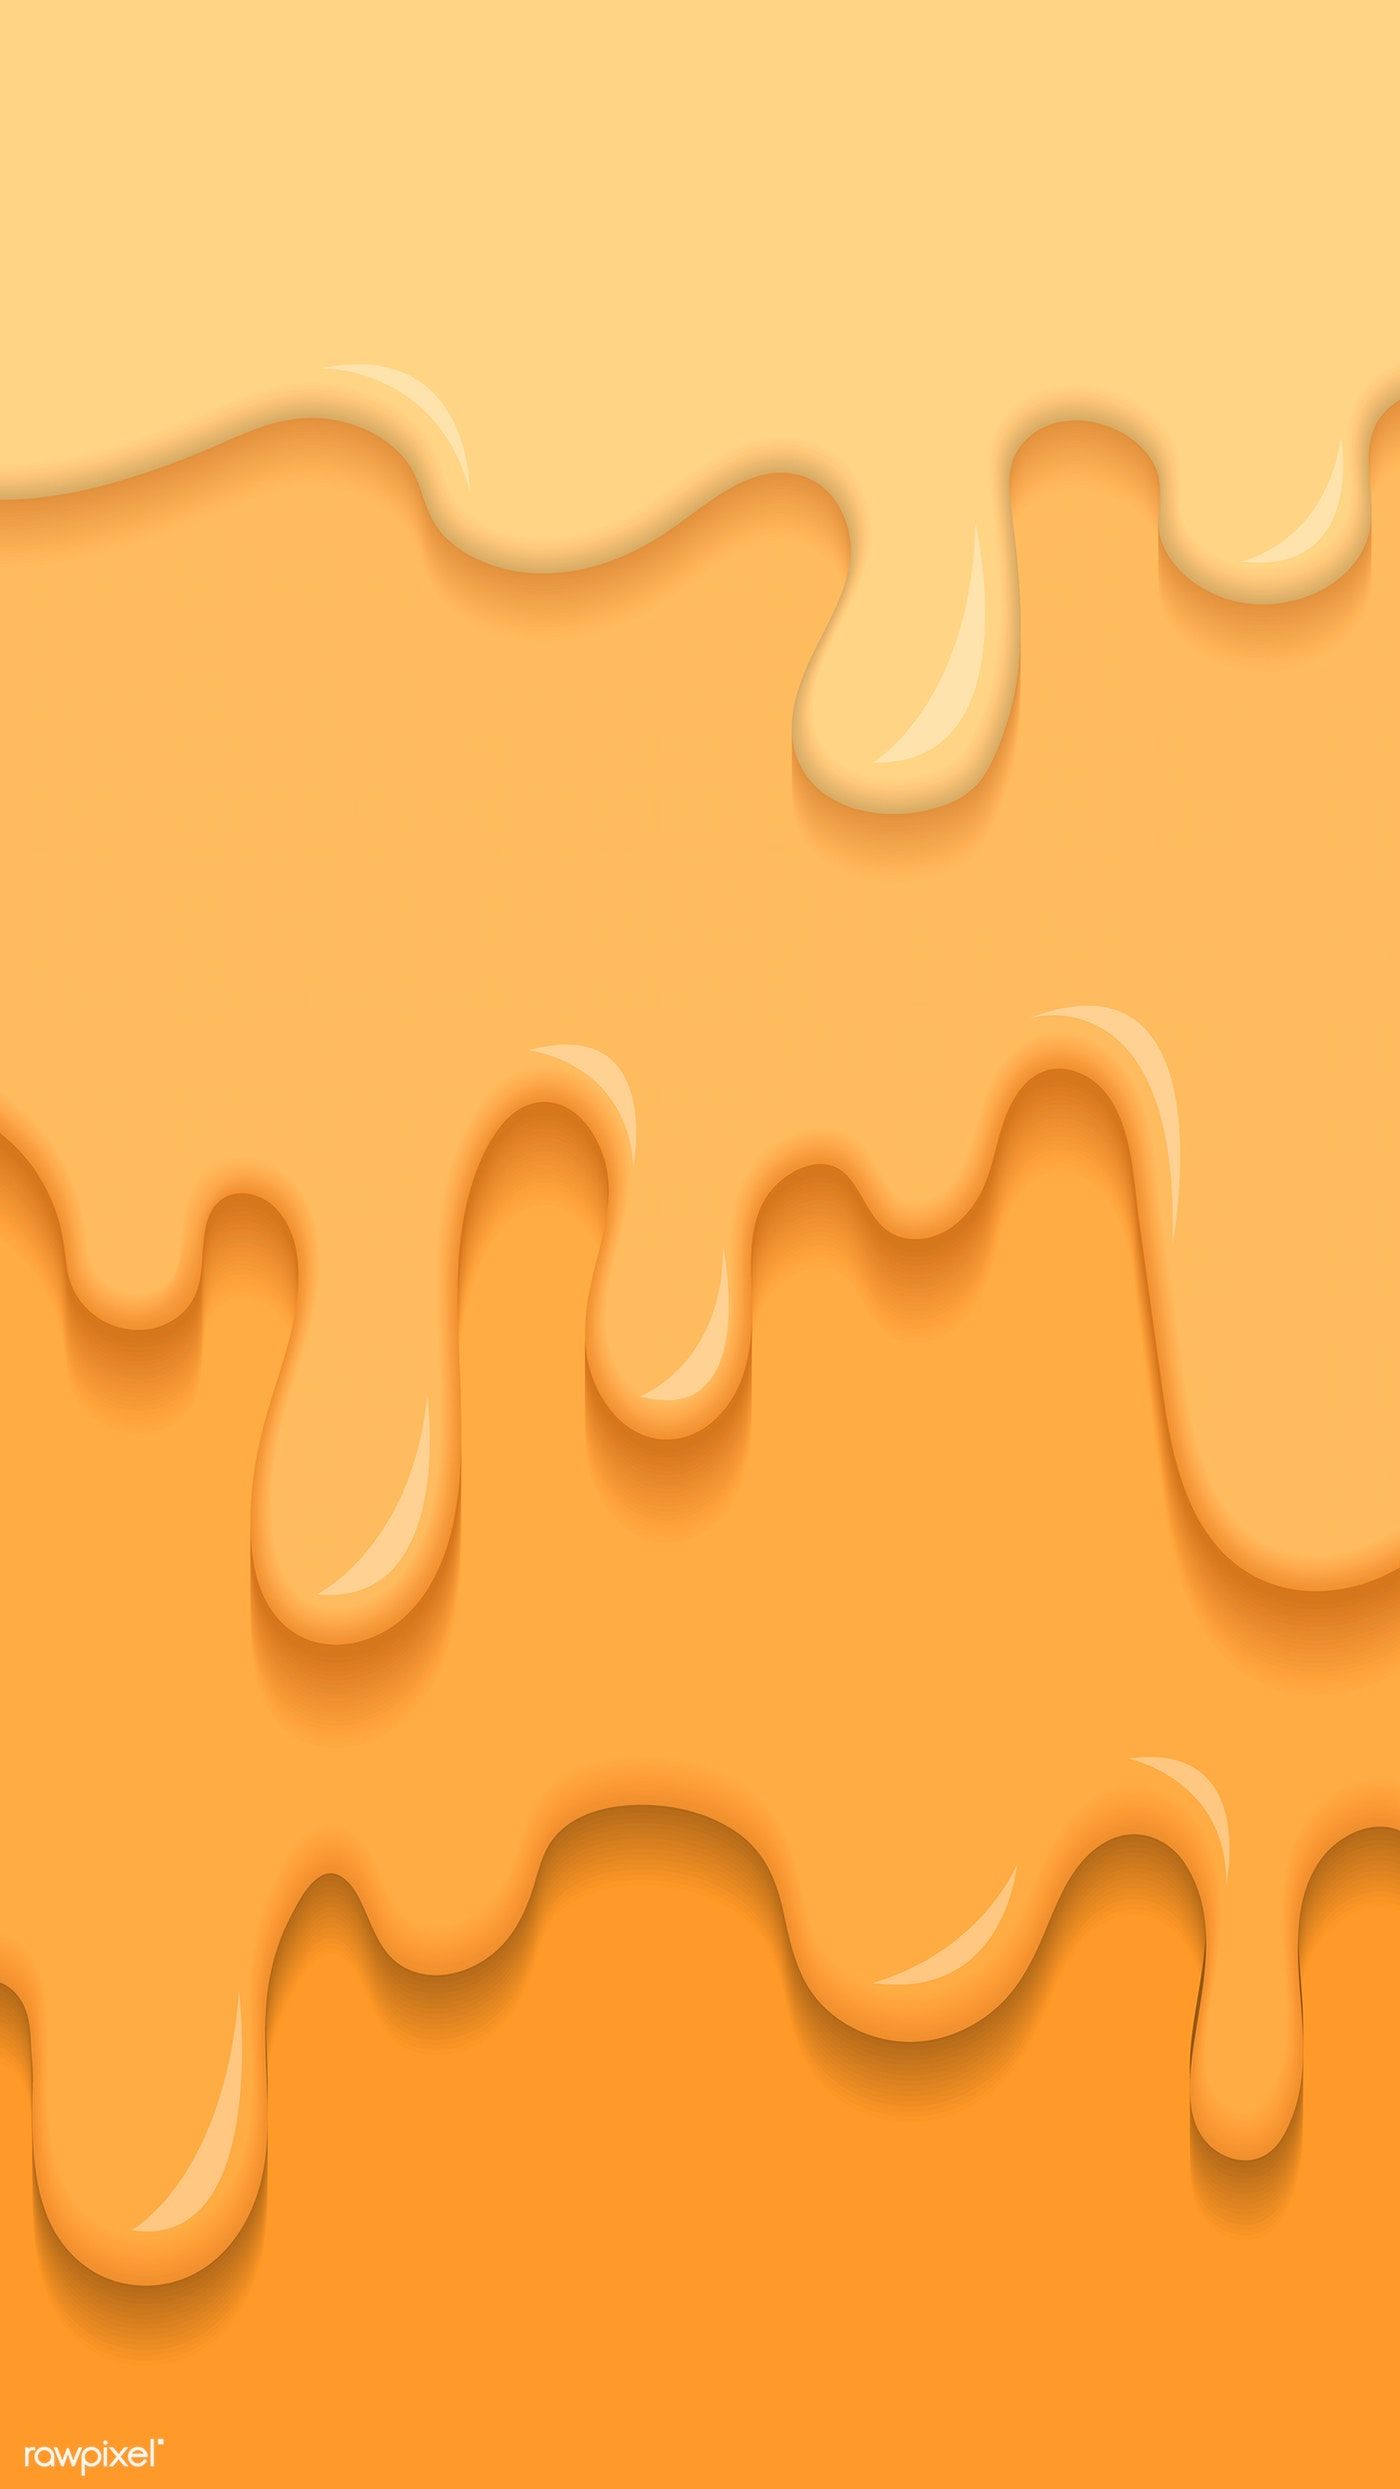 Download premium vector of Creamy dripping shades of yellow mobile